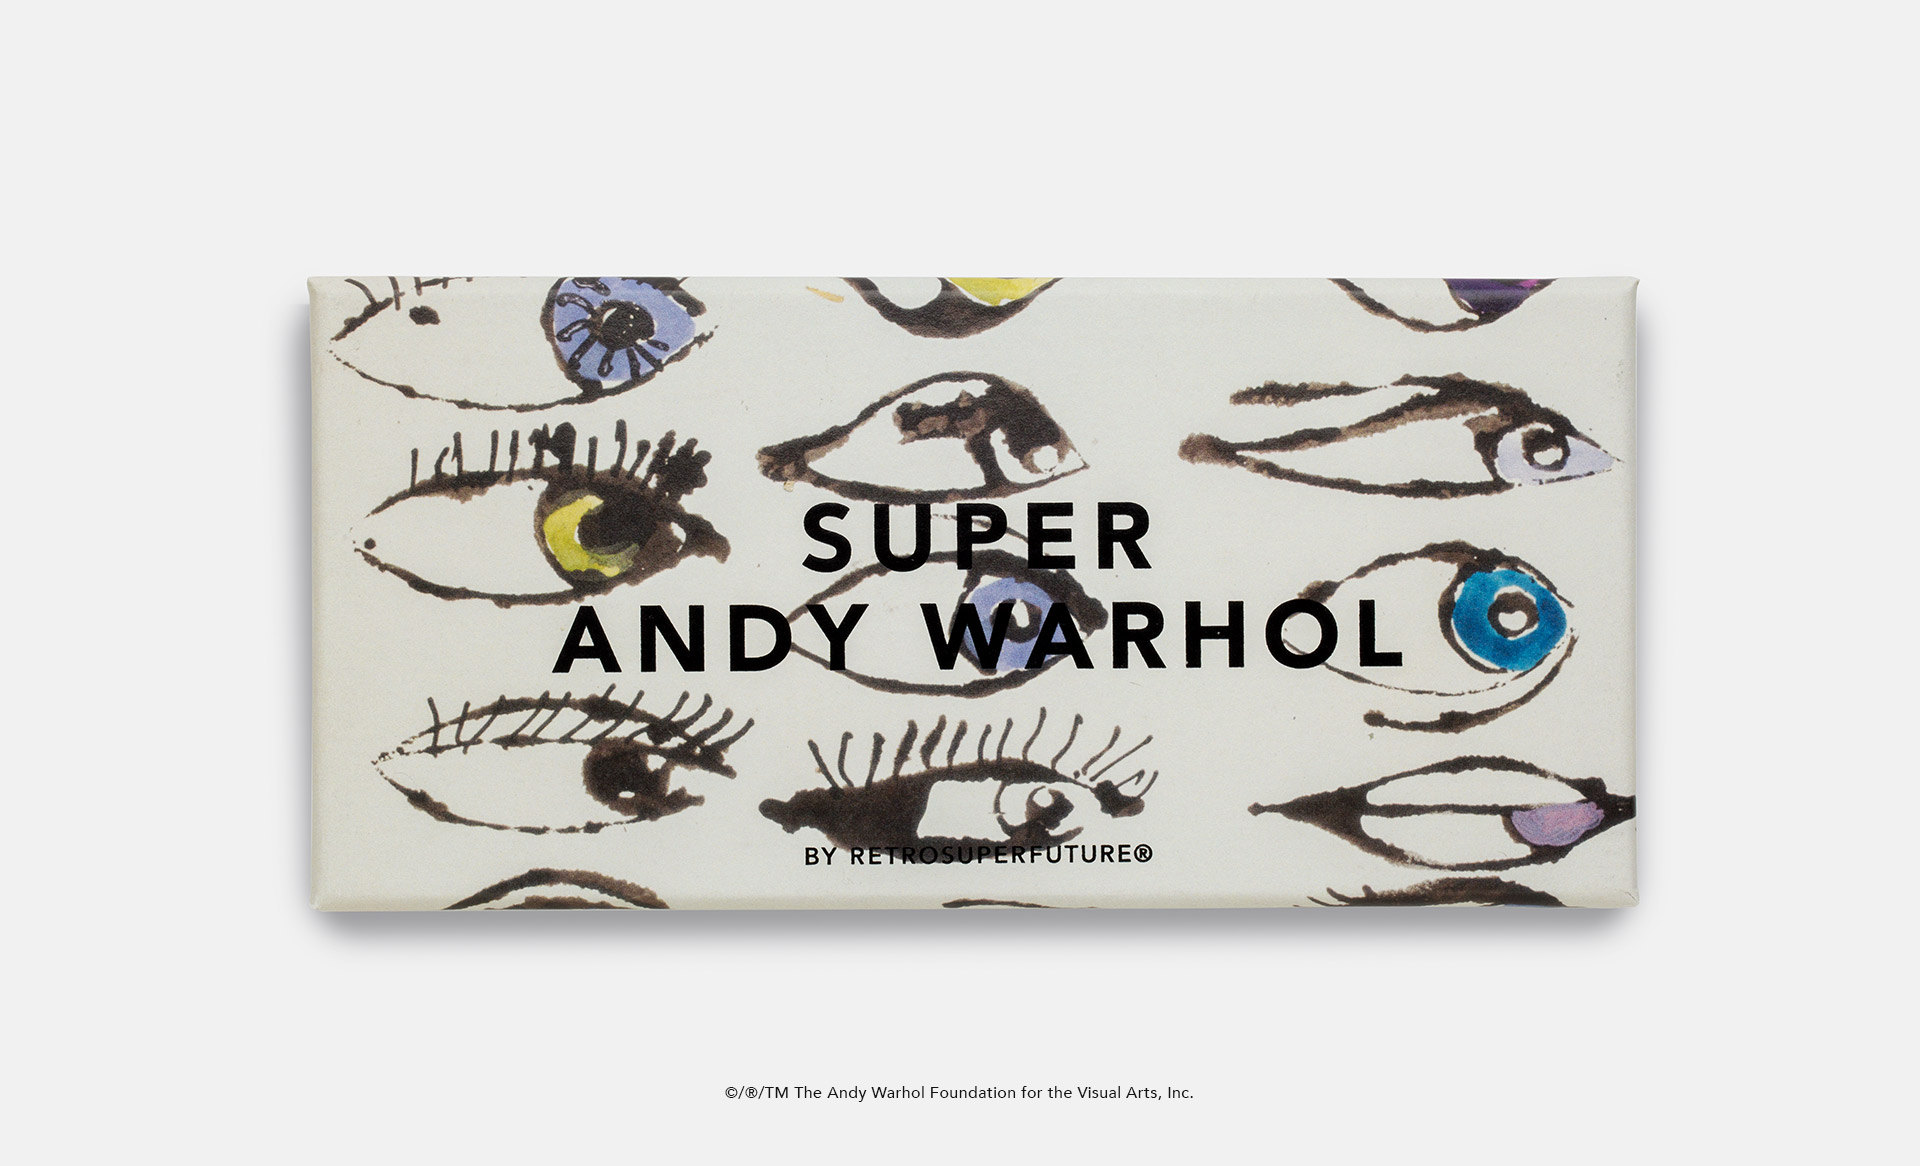 SUPER meets ANDY WARHOL: 4TH COLLABO